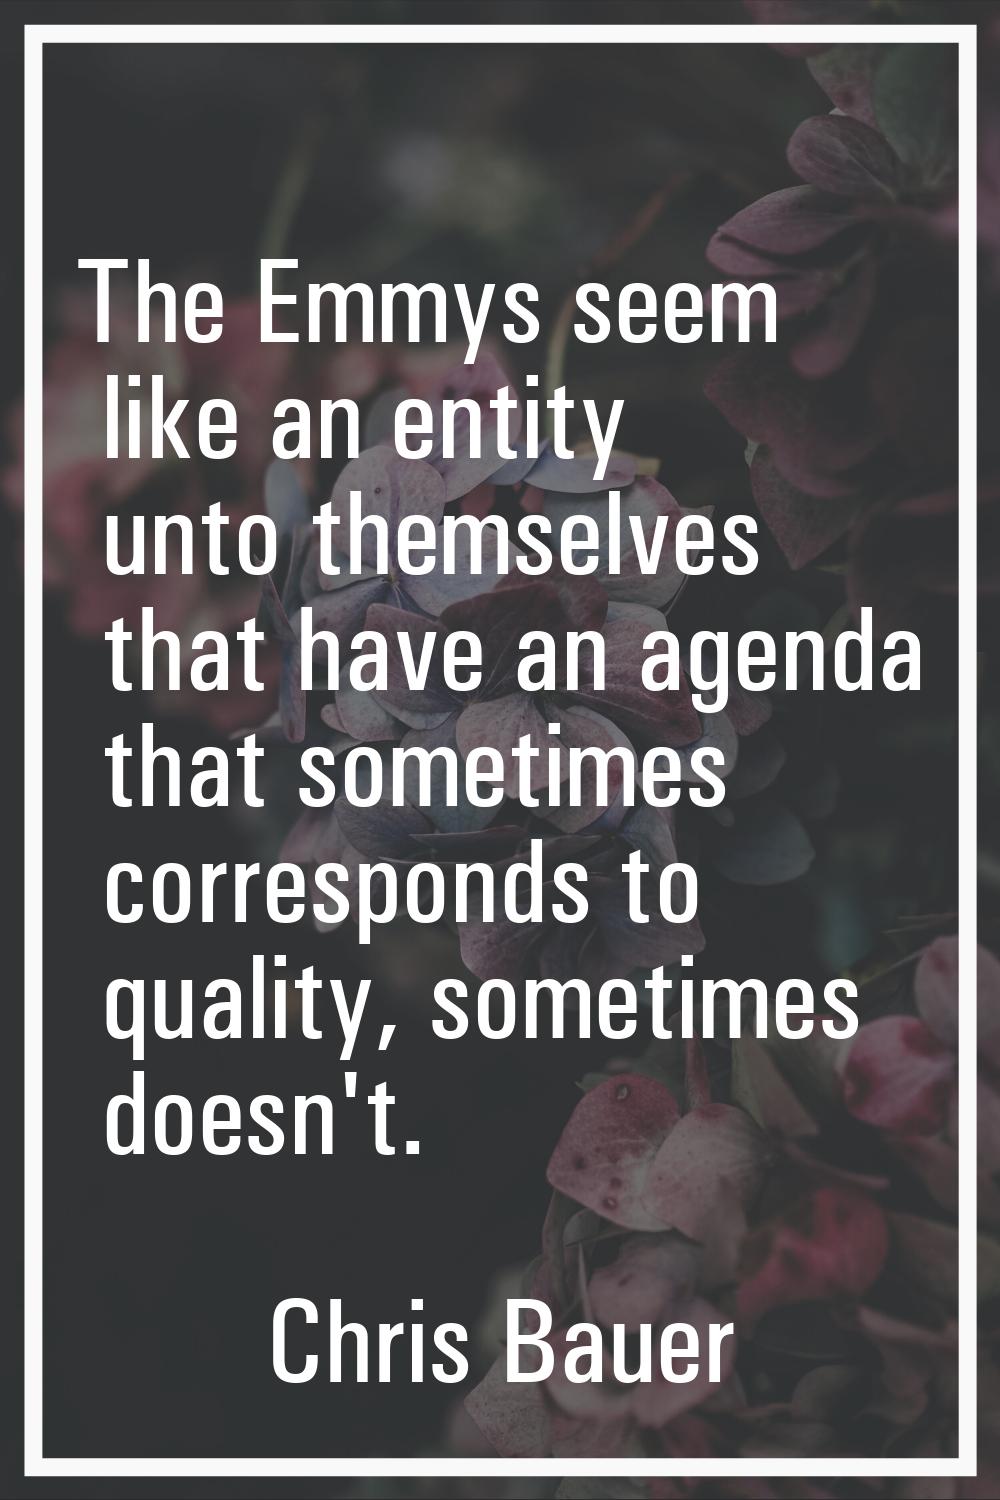 The Emmys seem like an entity unto themselves that have an agenda that sometimes corresponds to qua